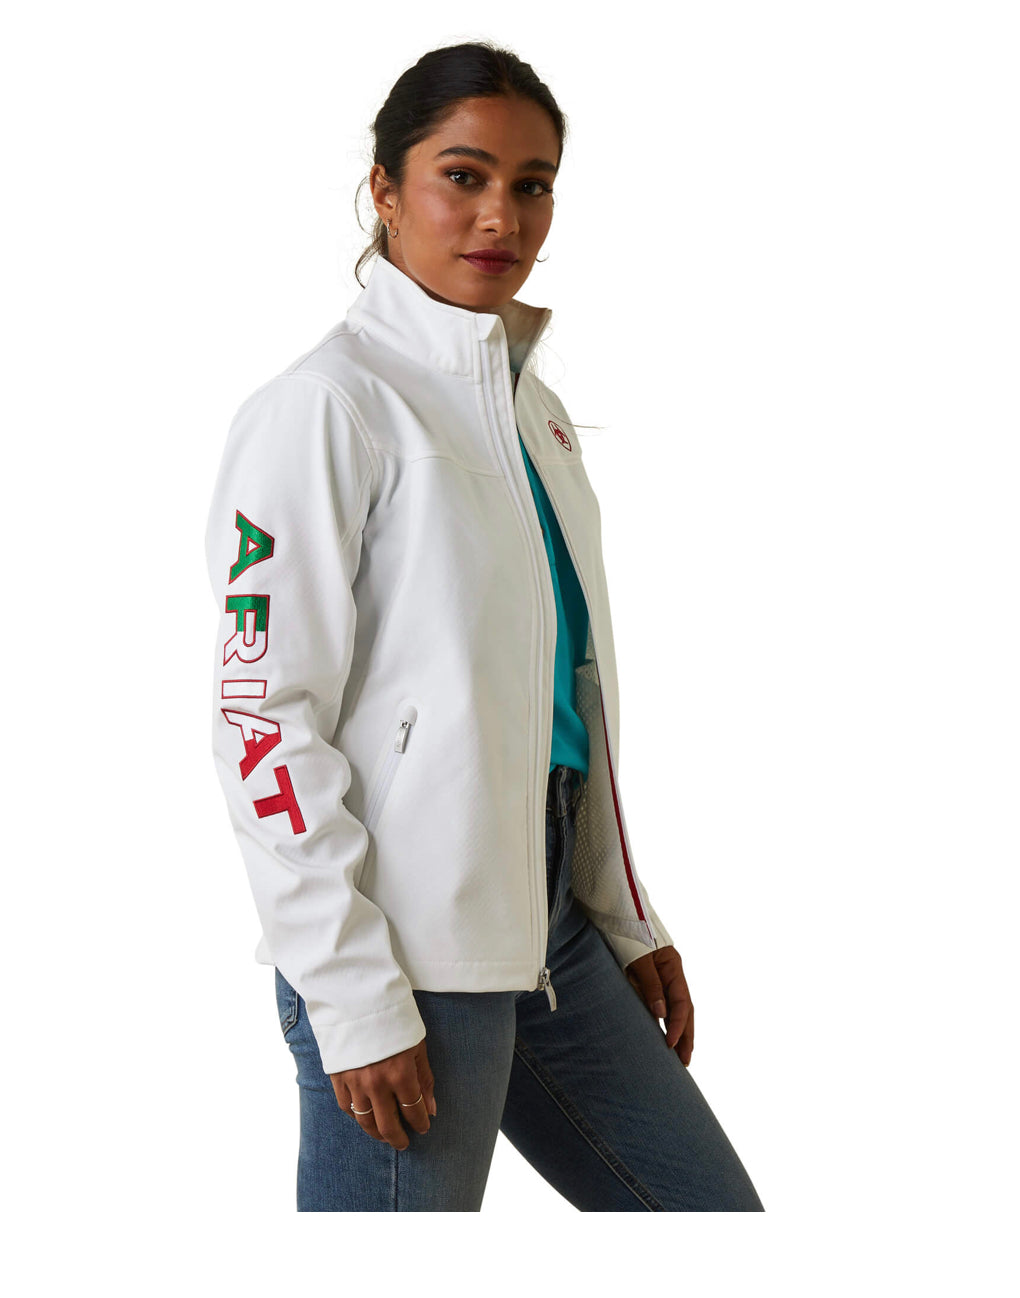 Women's Ariat Classic Team Mexico Softshell Water Resistant Jacket